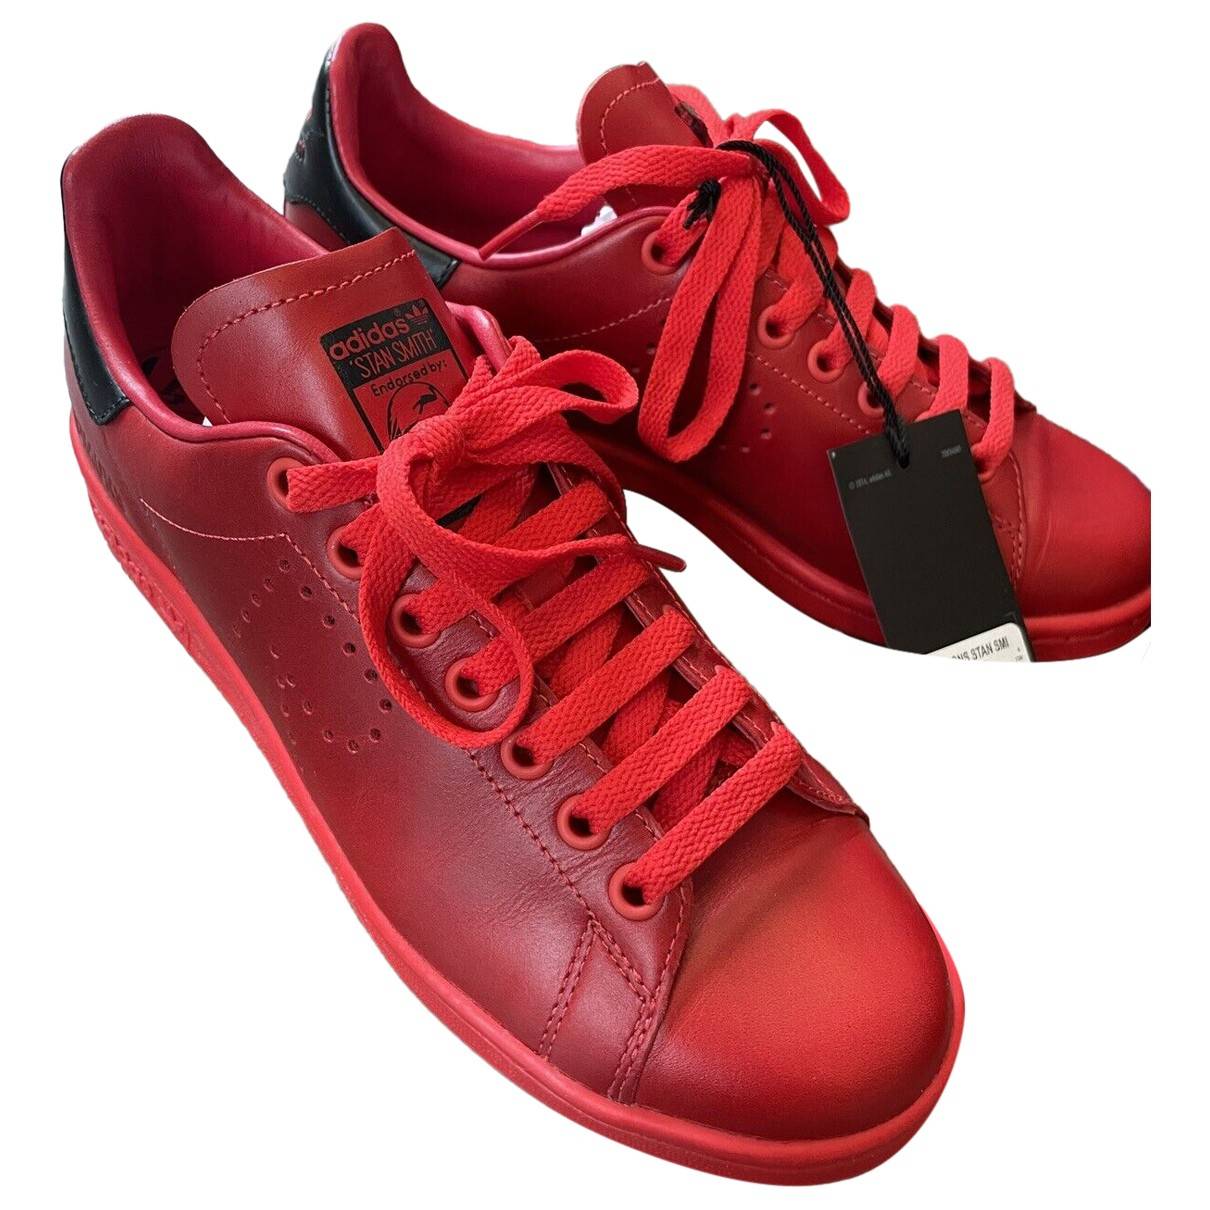 Stan smith leather low trainers Adidas x Raf Simons Red size 6 UK in  Leather - 27552944